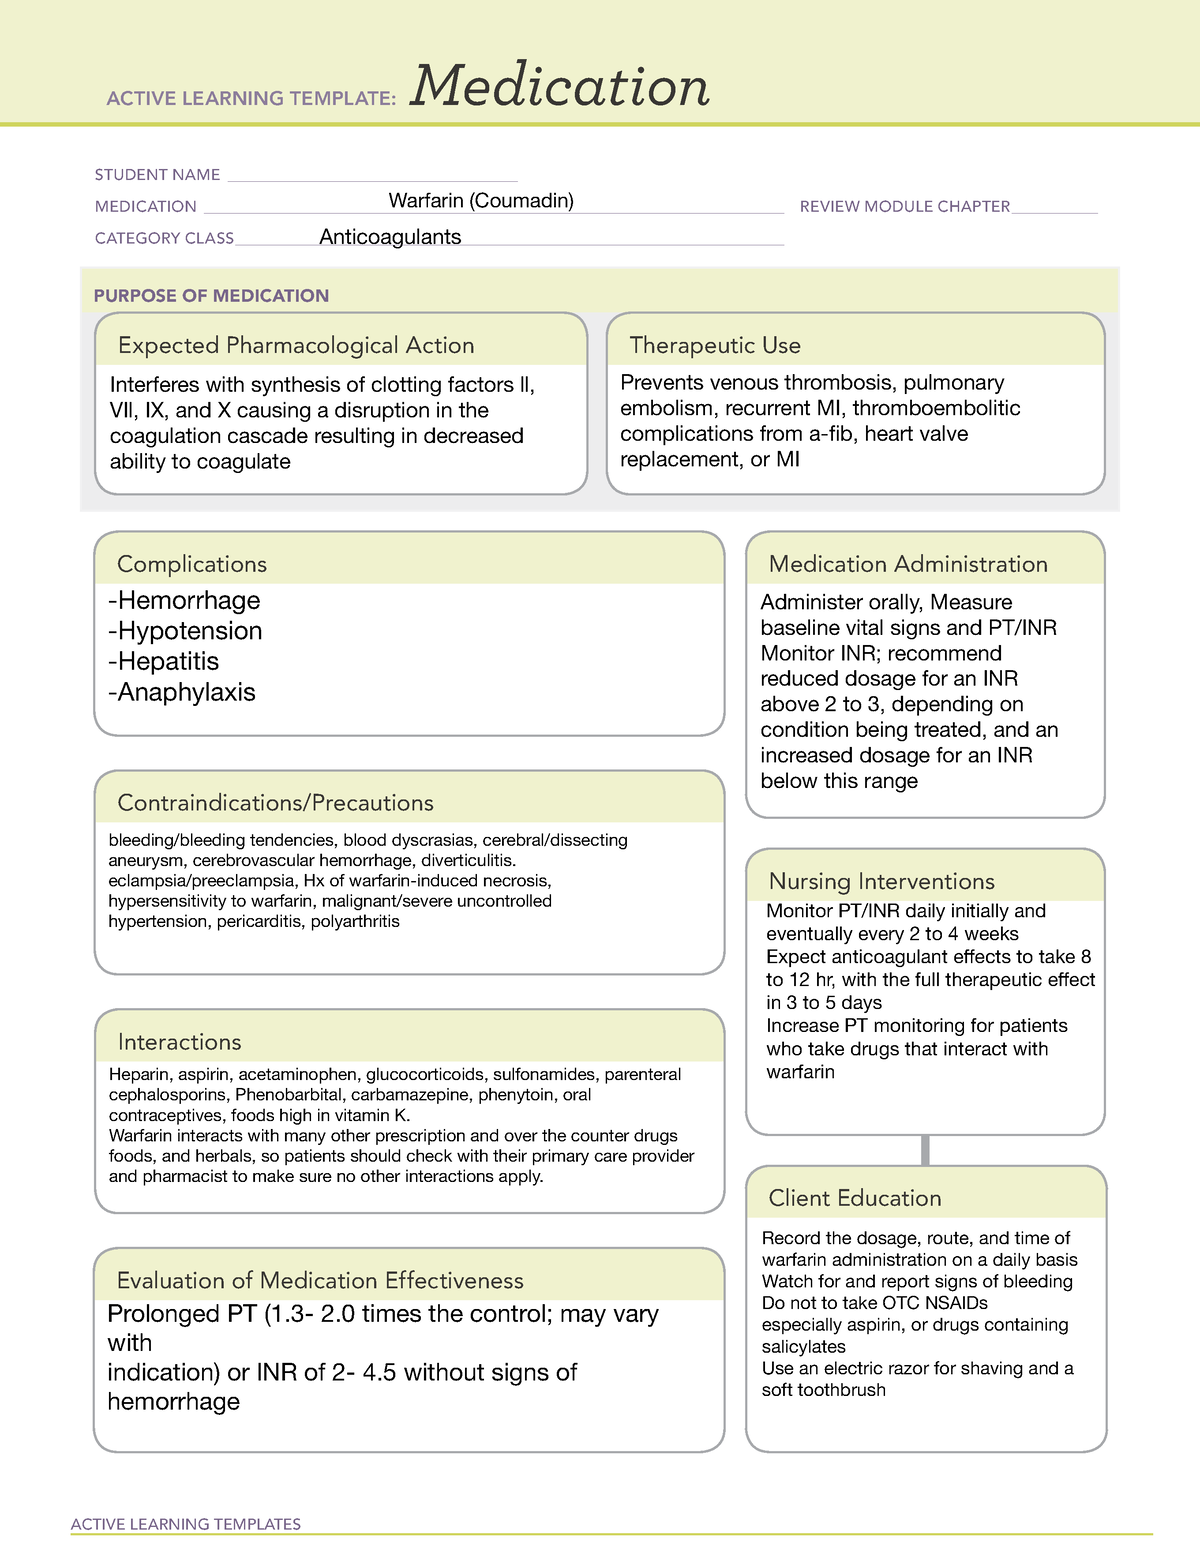 coumadin-2-ati-med-temp-active-learning-templates-medication-student-name-studocu